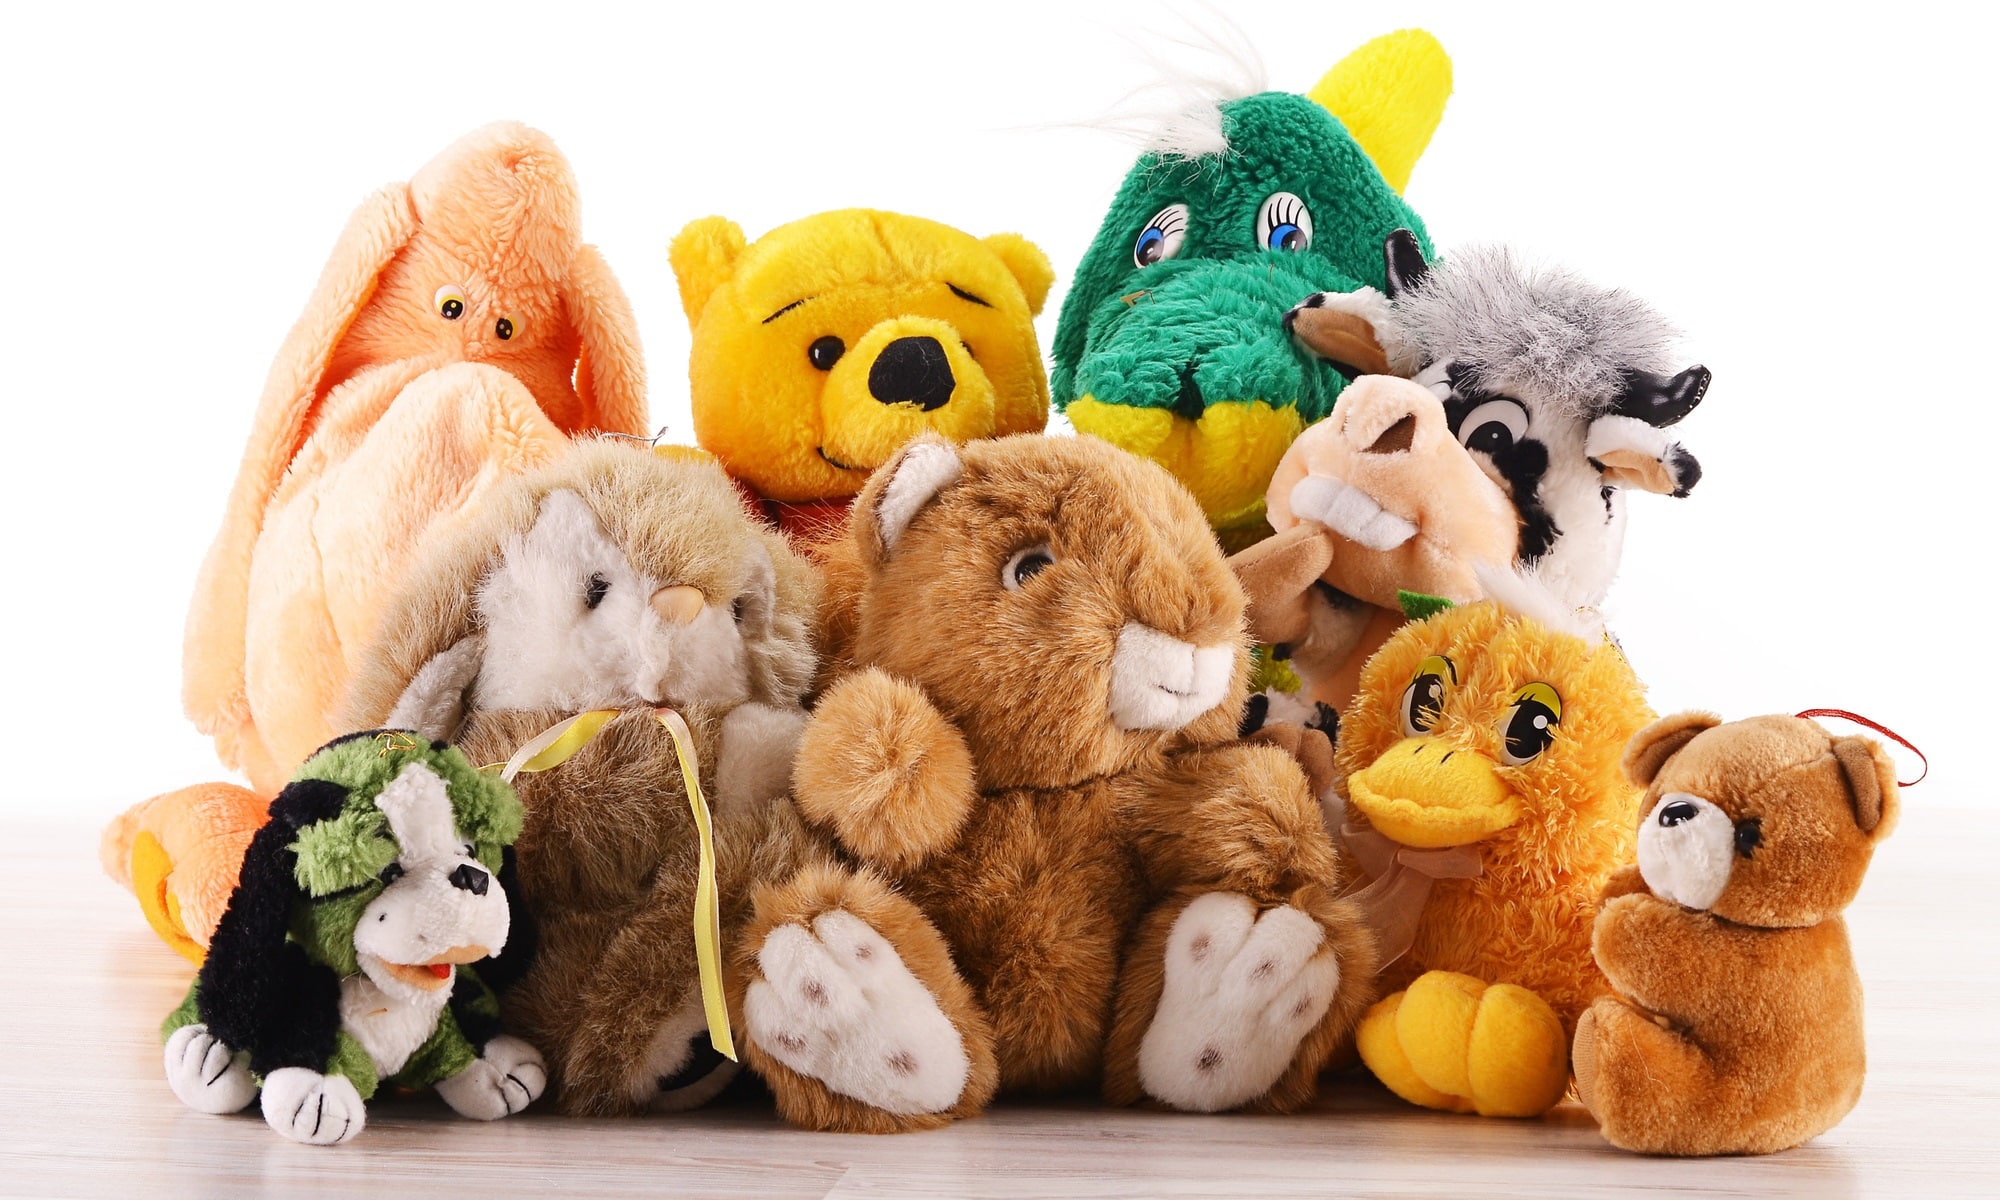 Teddy Bears and Toys from Babywear Brands